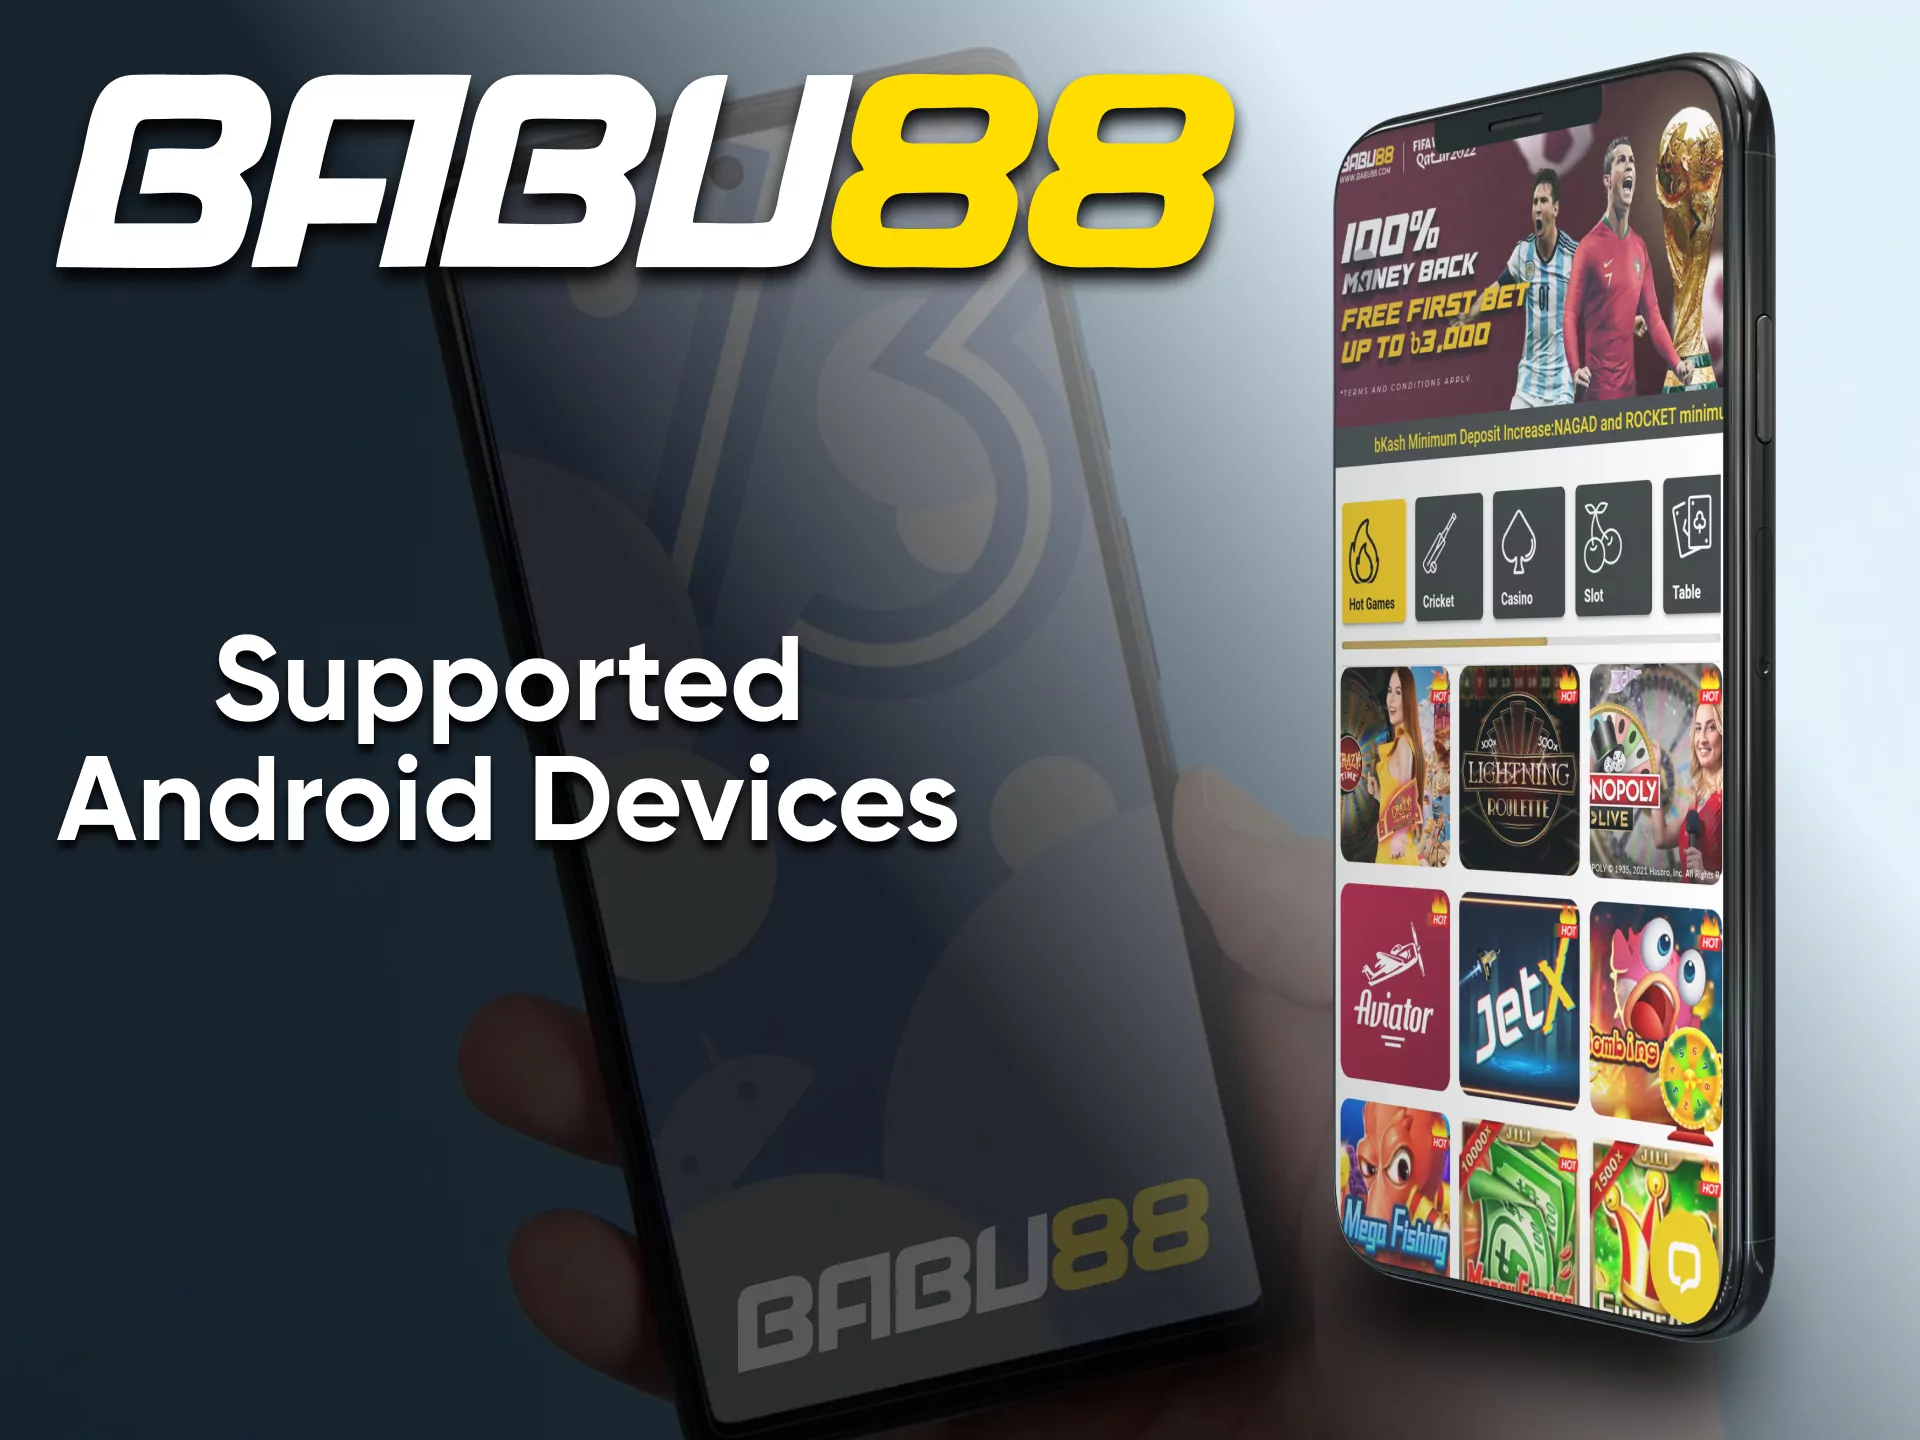 For games at Babu88 casino, use your smartphone.